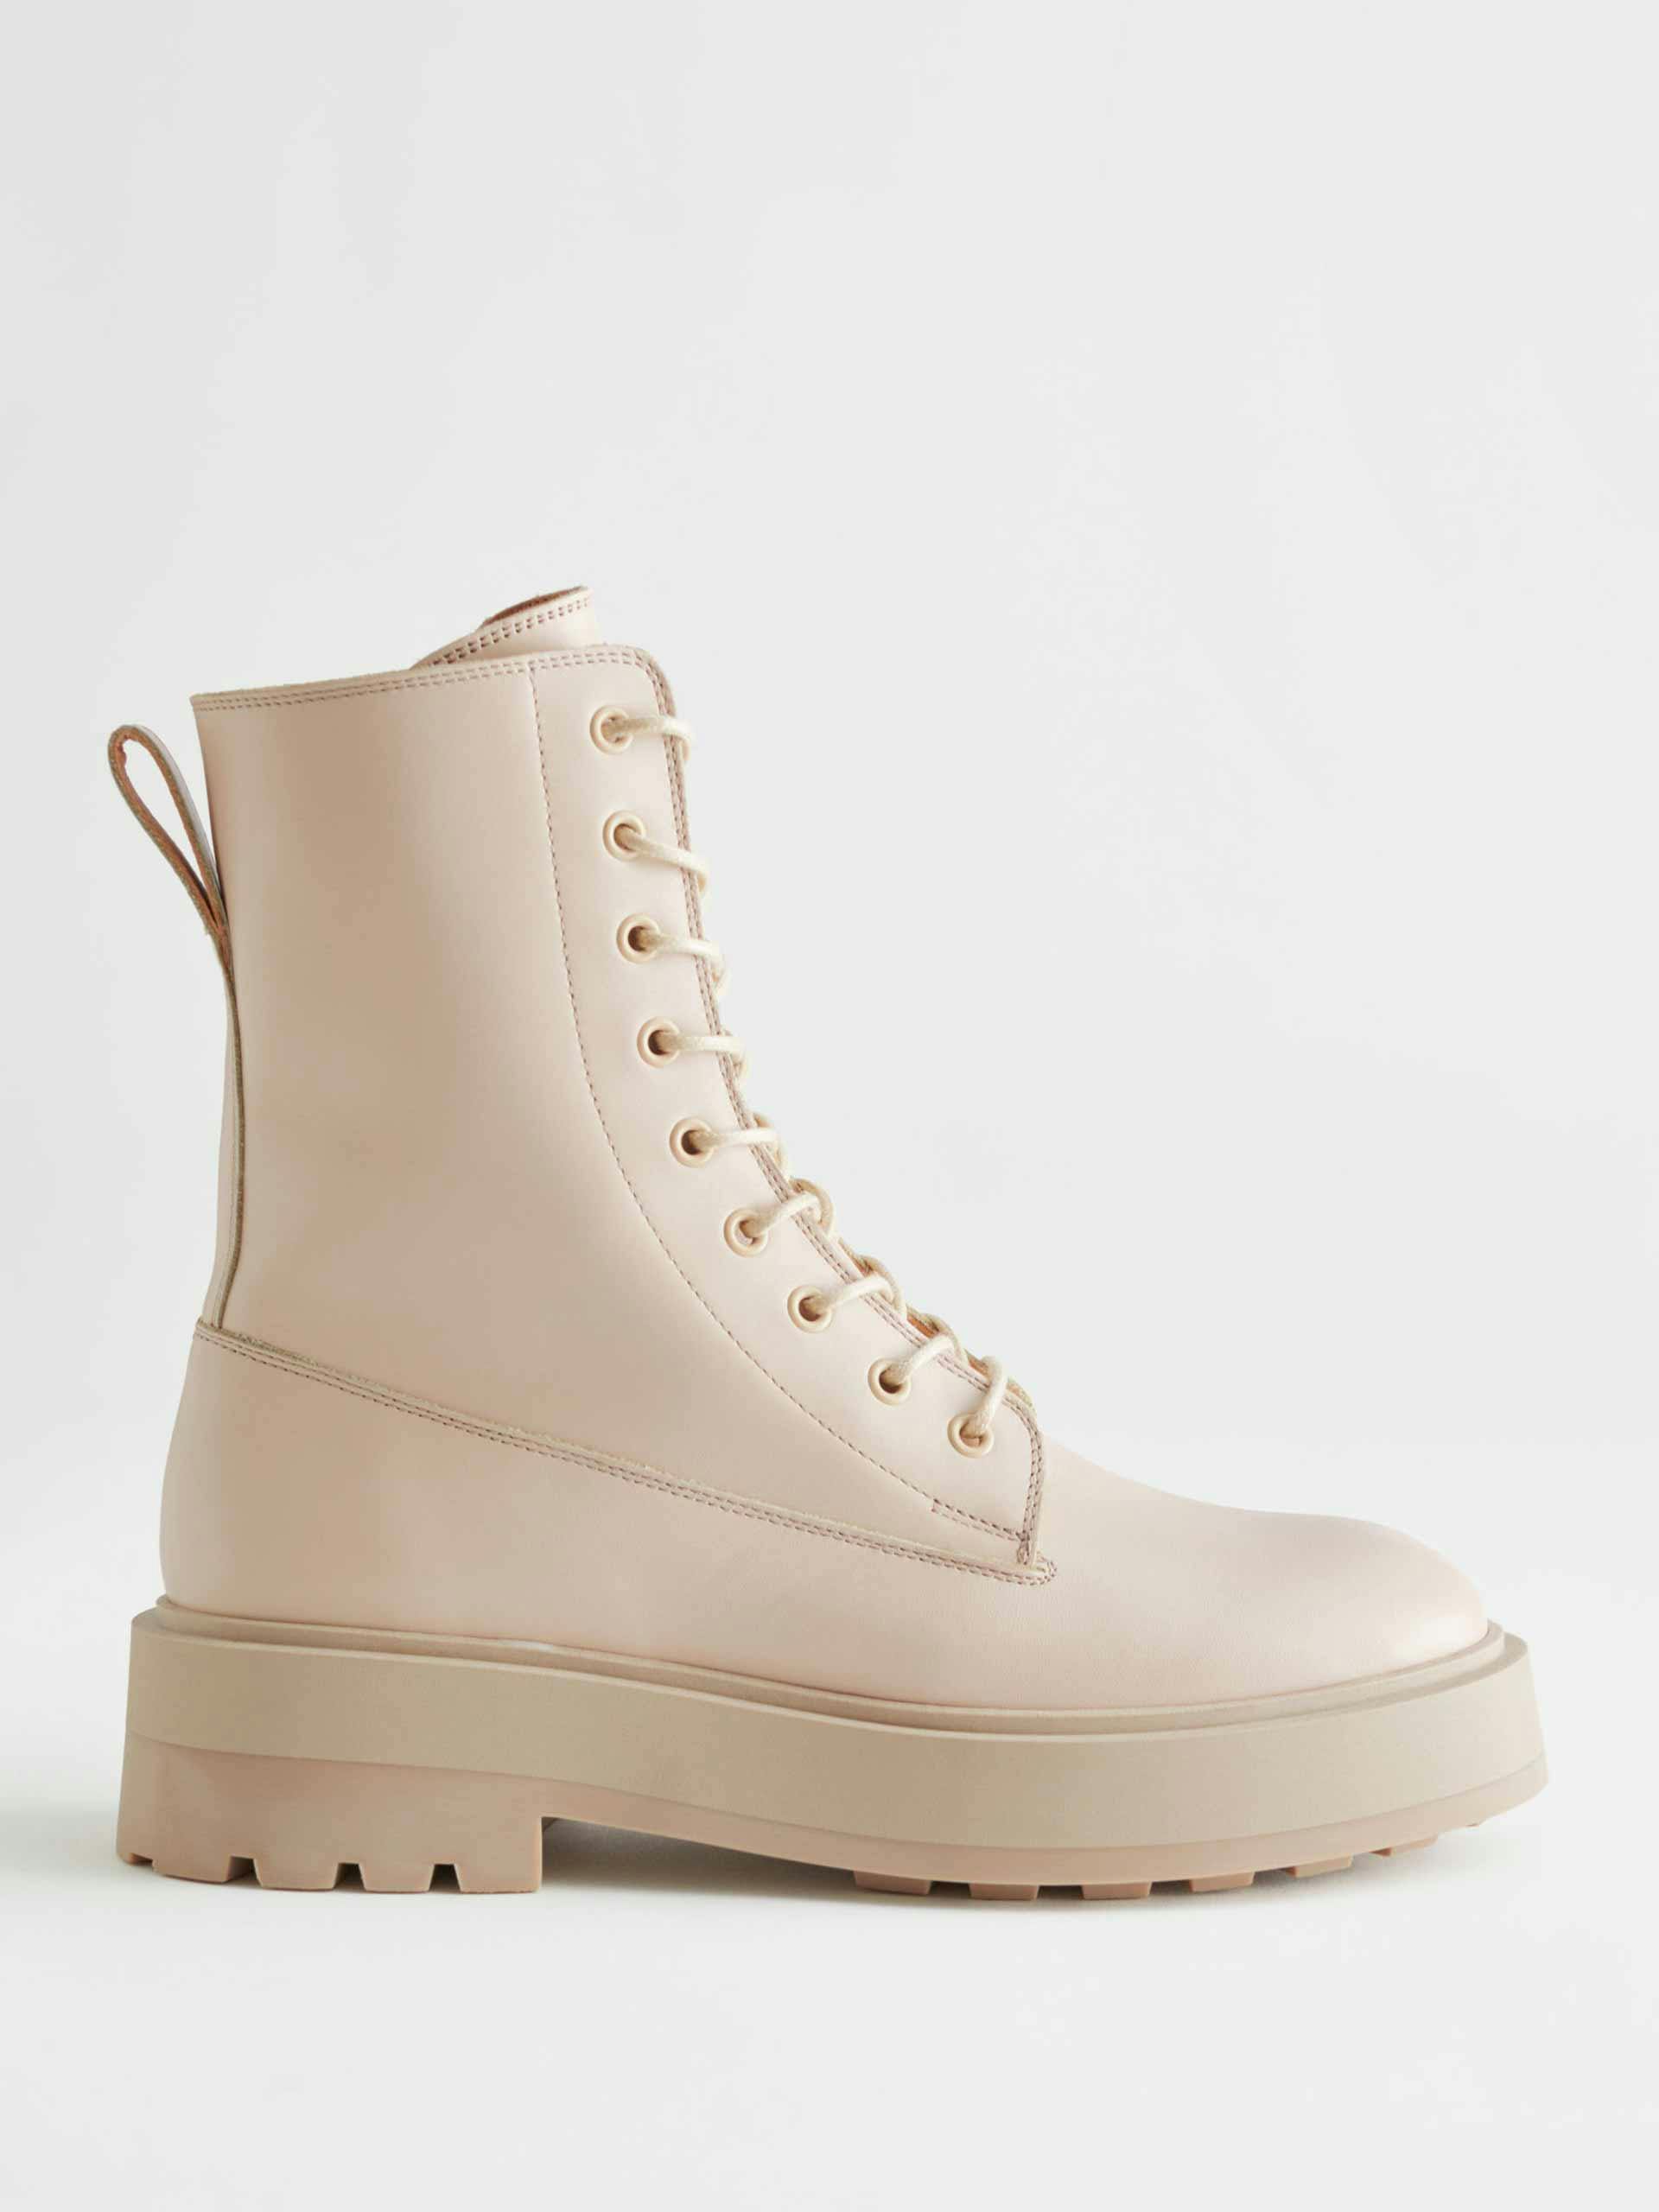 Chunky beige platform leather boots